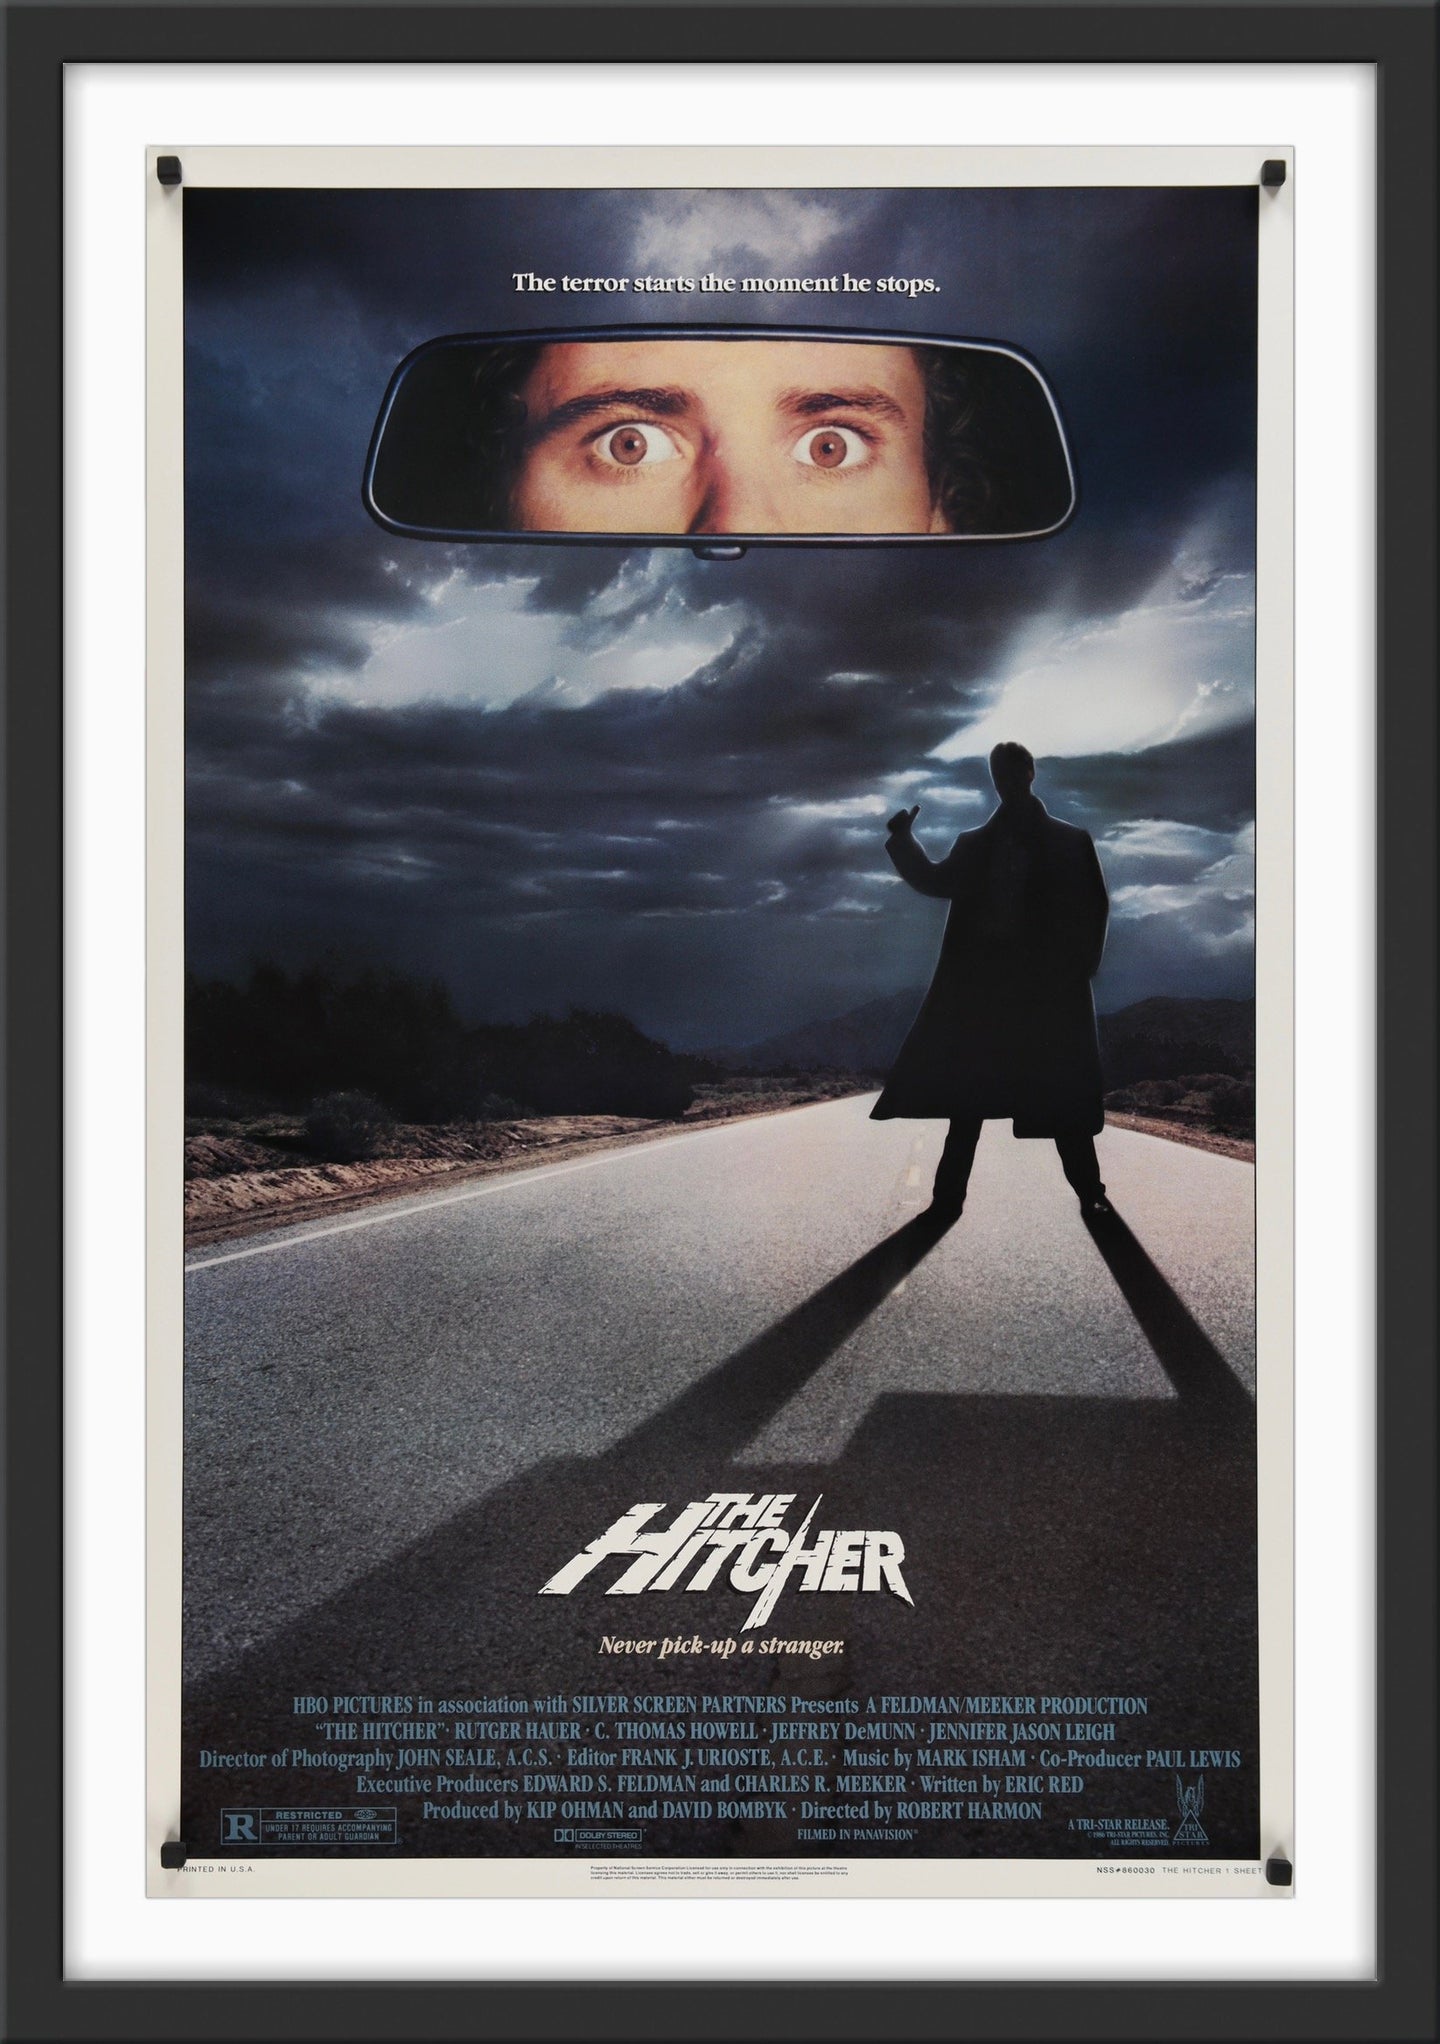 An original movie poster for the 1986 film The Hitcher